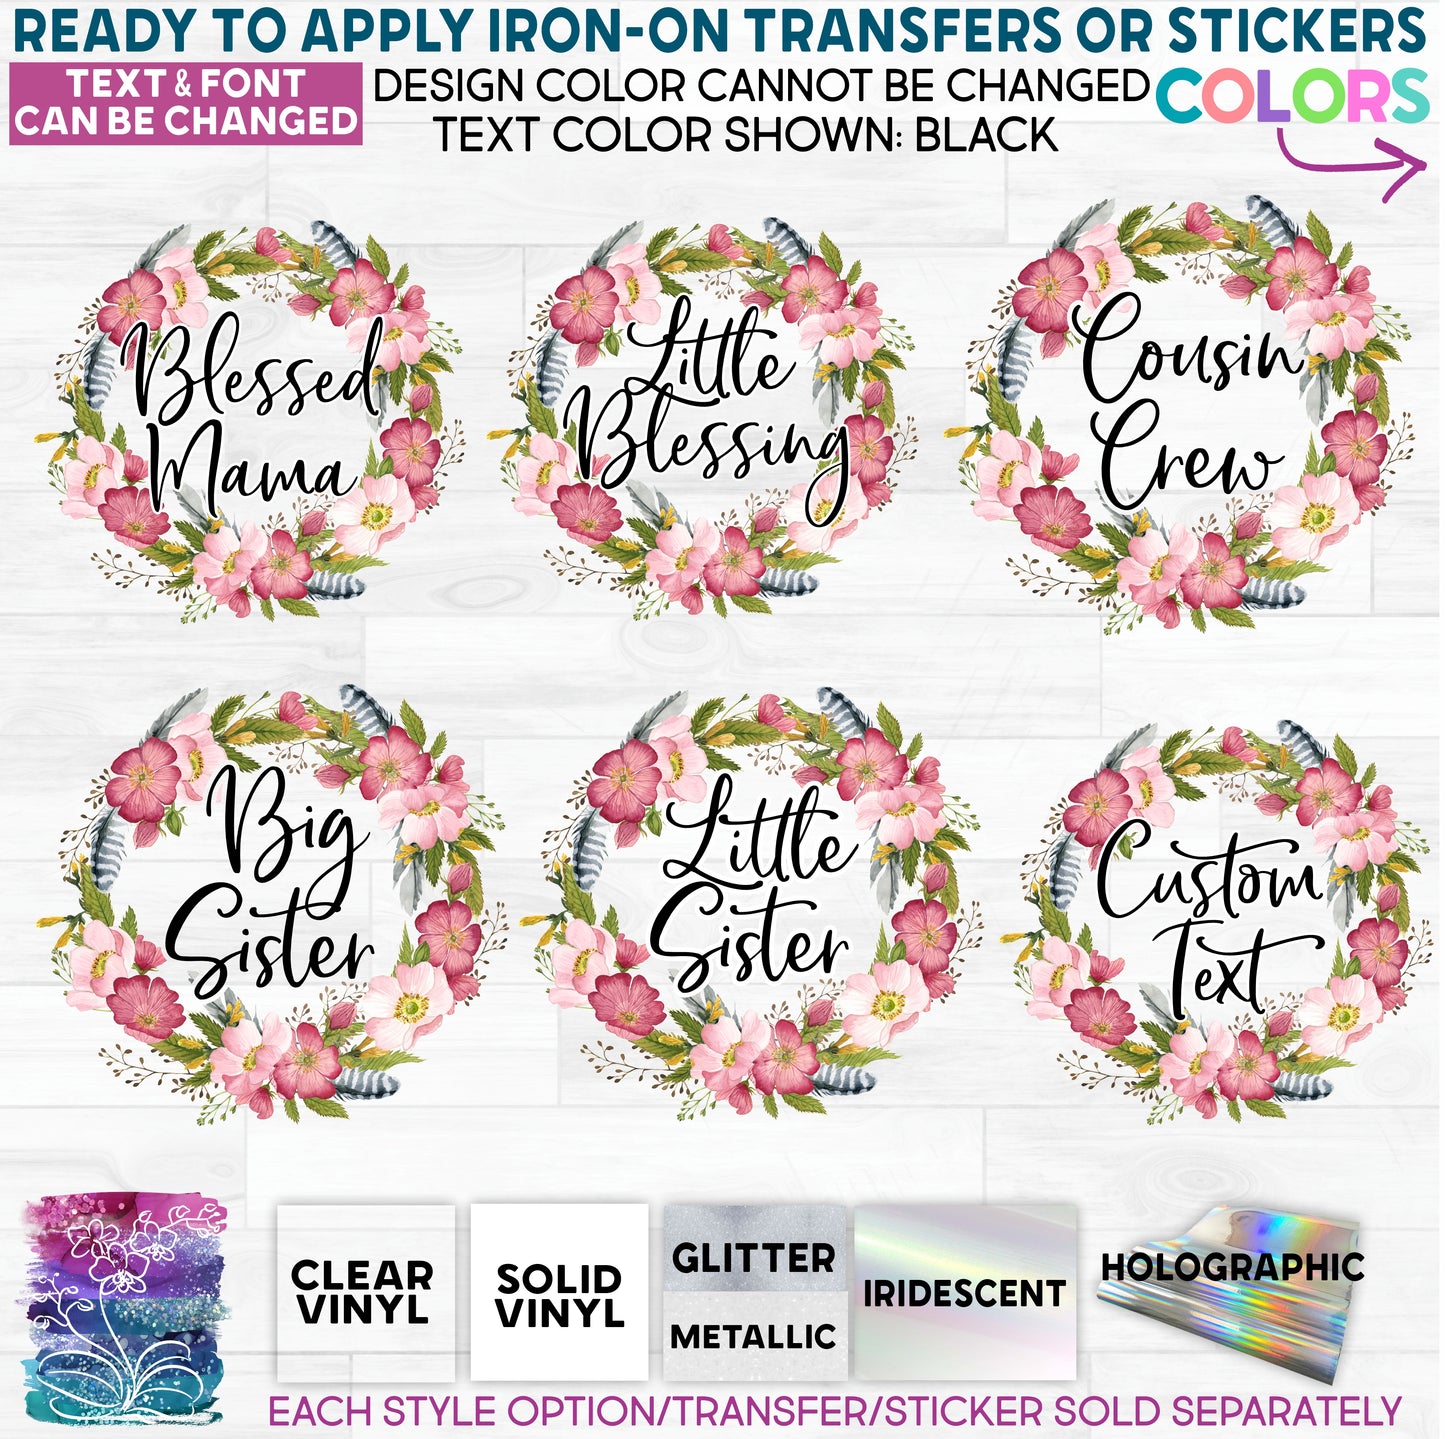 (s002-4) Big Sister, Little Sister, Custom Text Wild Rose Floral Flowers Watercolor Glitter or Vinyl Iron-On Transfer or Sticker